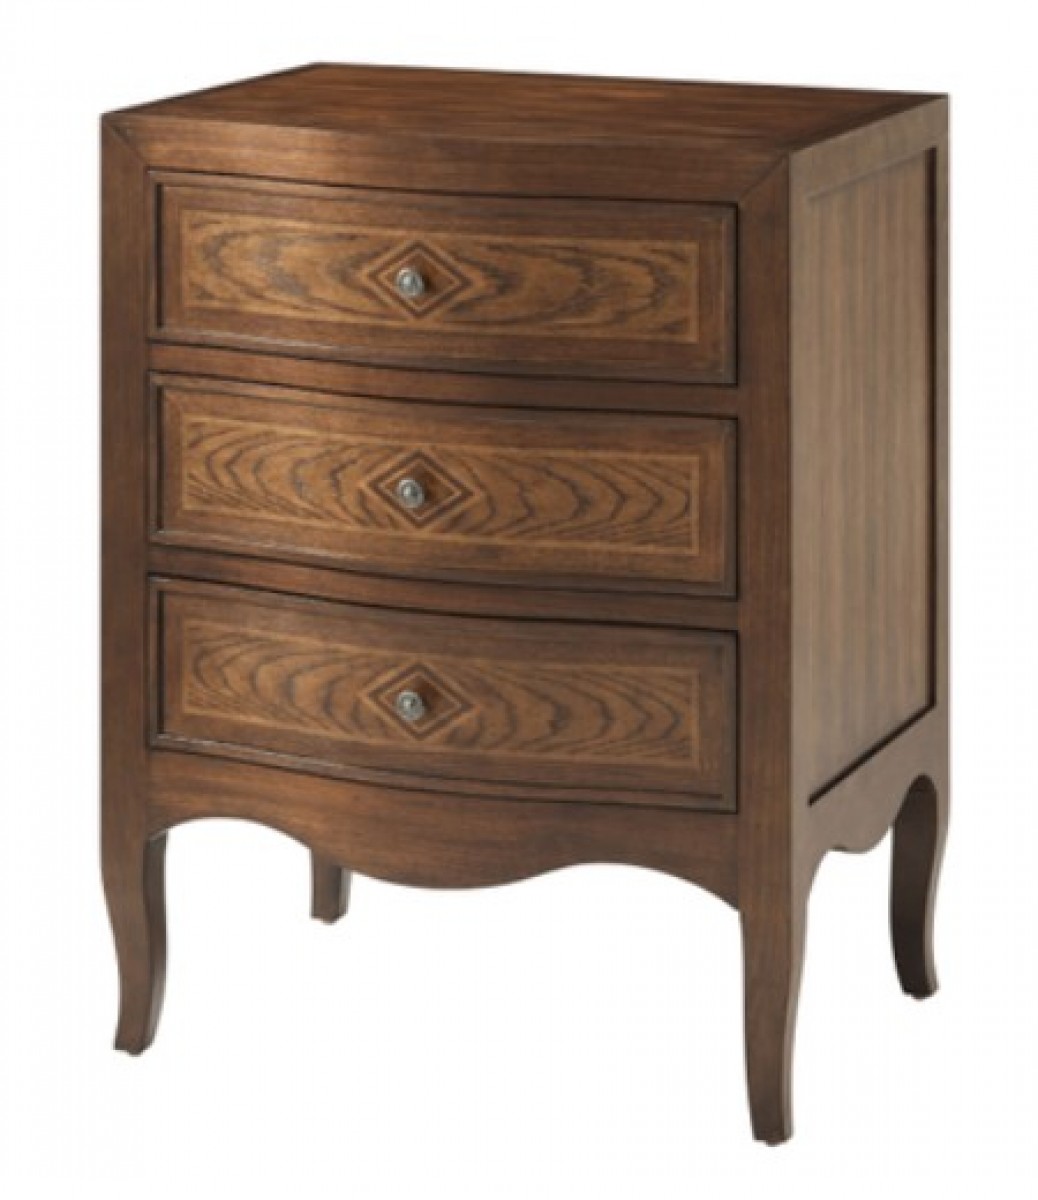 The Remy Nightstand